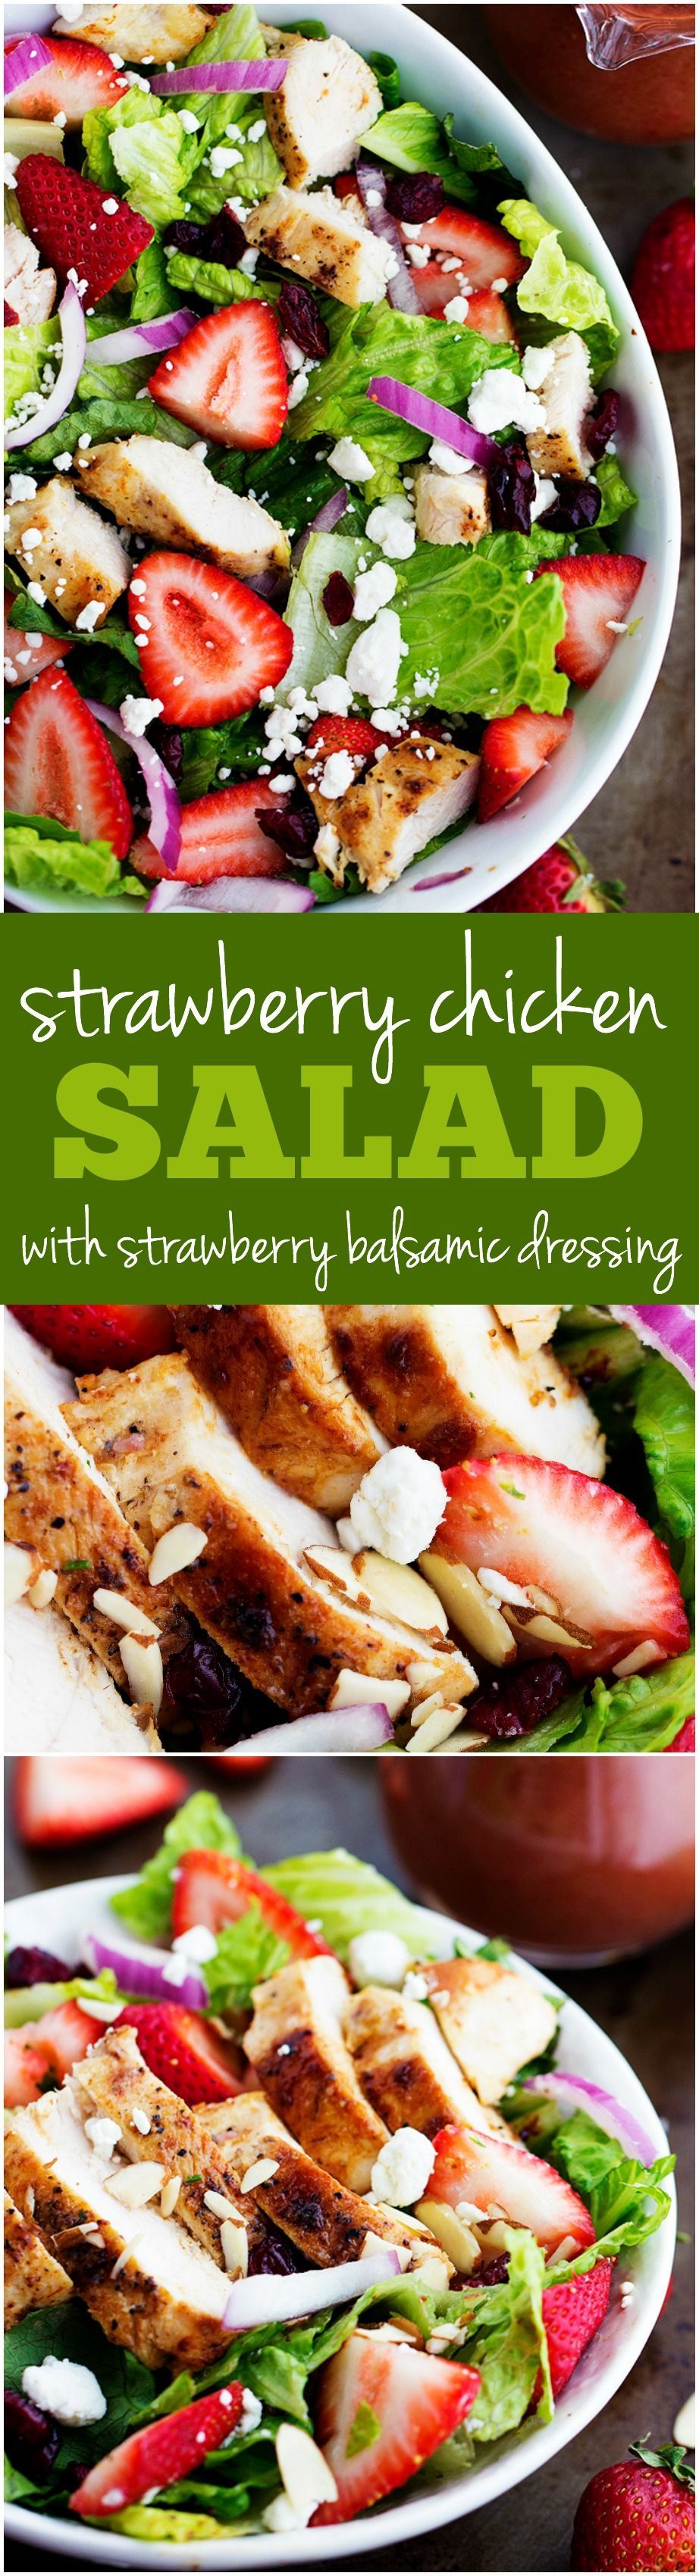 This Strawberry Chicken salad is full of fresh strawberries and topped with a strawberry balsamic dressing. Perfect for summer!